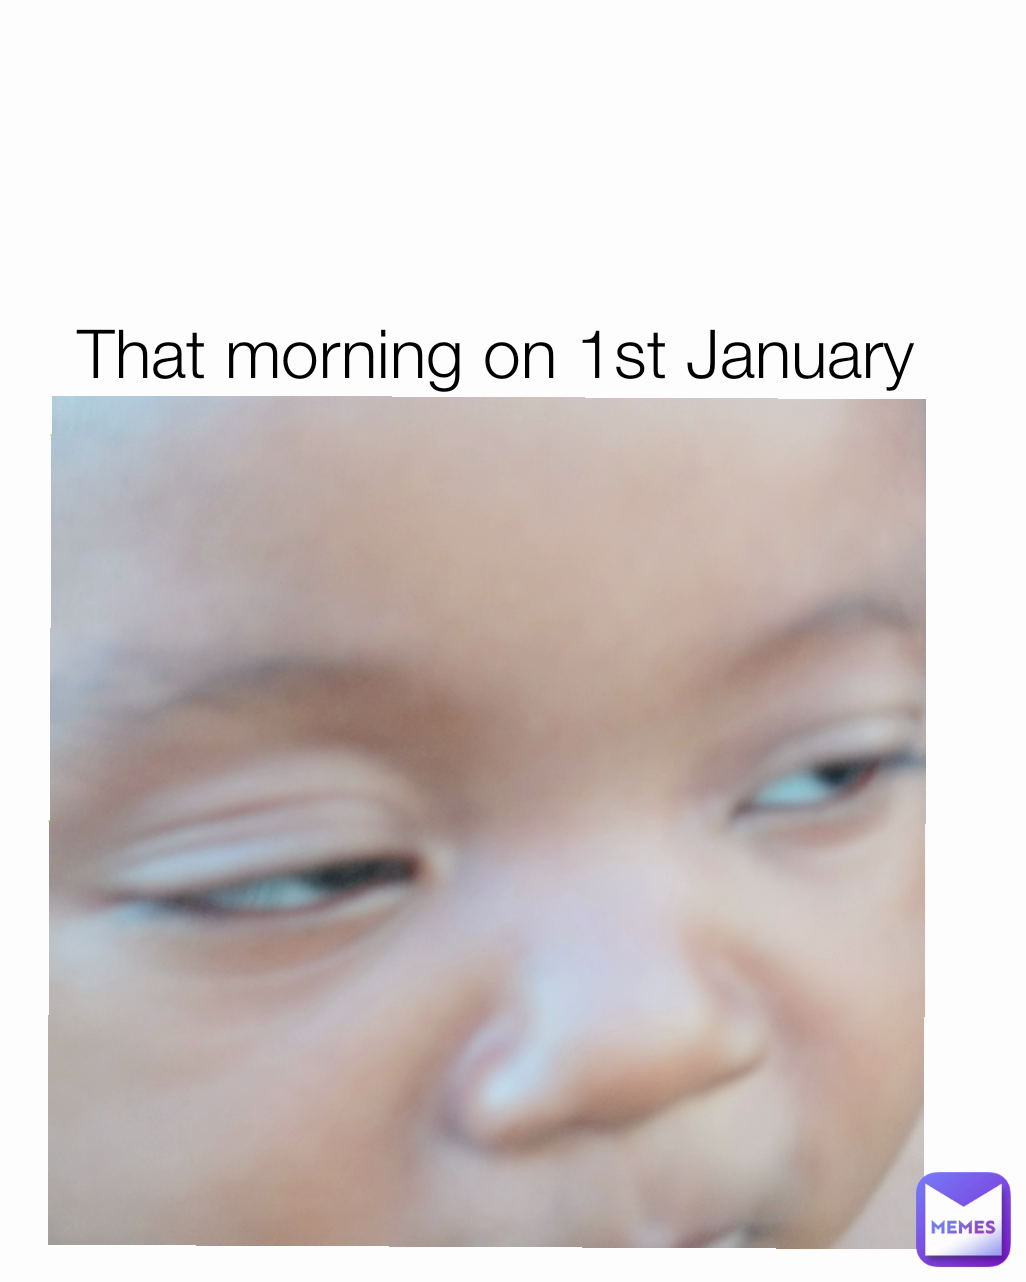 That morning on 1st January